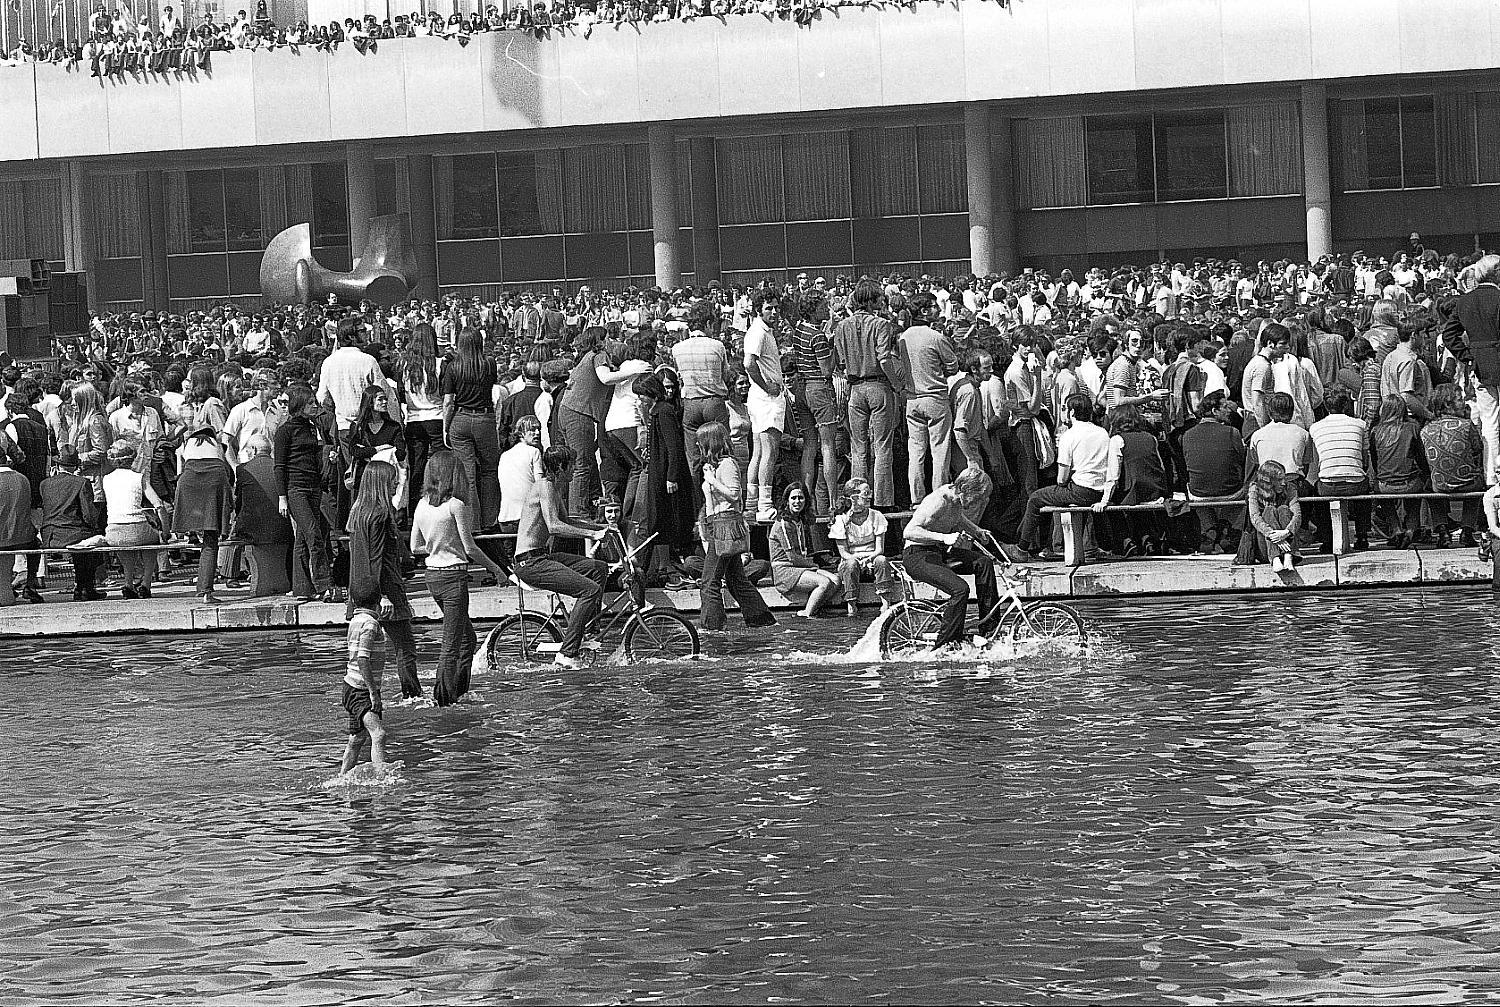 Crowd at Lighthouse Concert at City Hall, Toronto, 1970: crowd scene with people wading in City Hall reflecting pool.